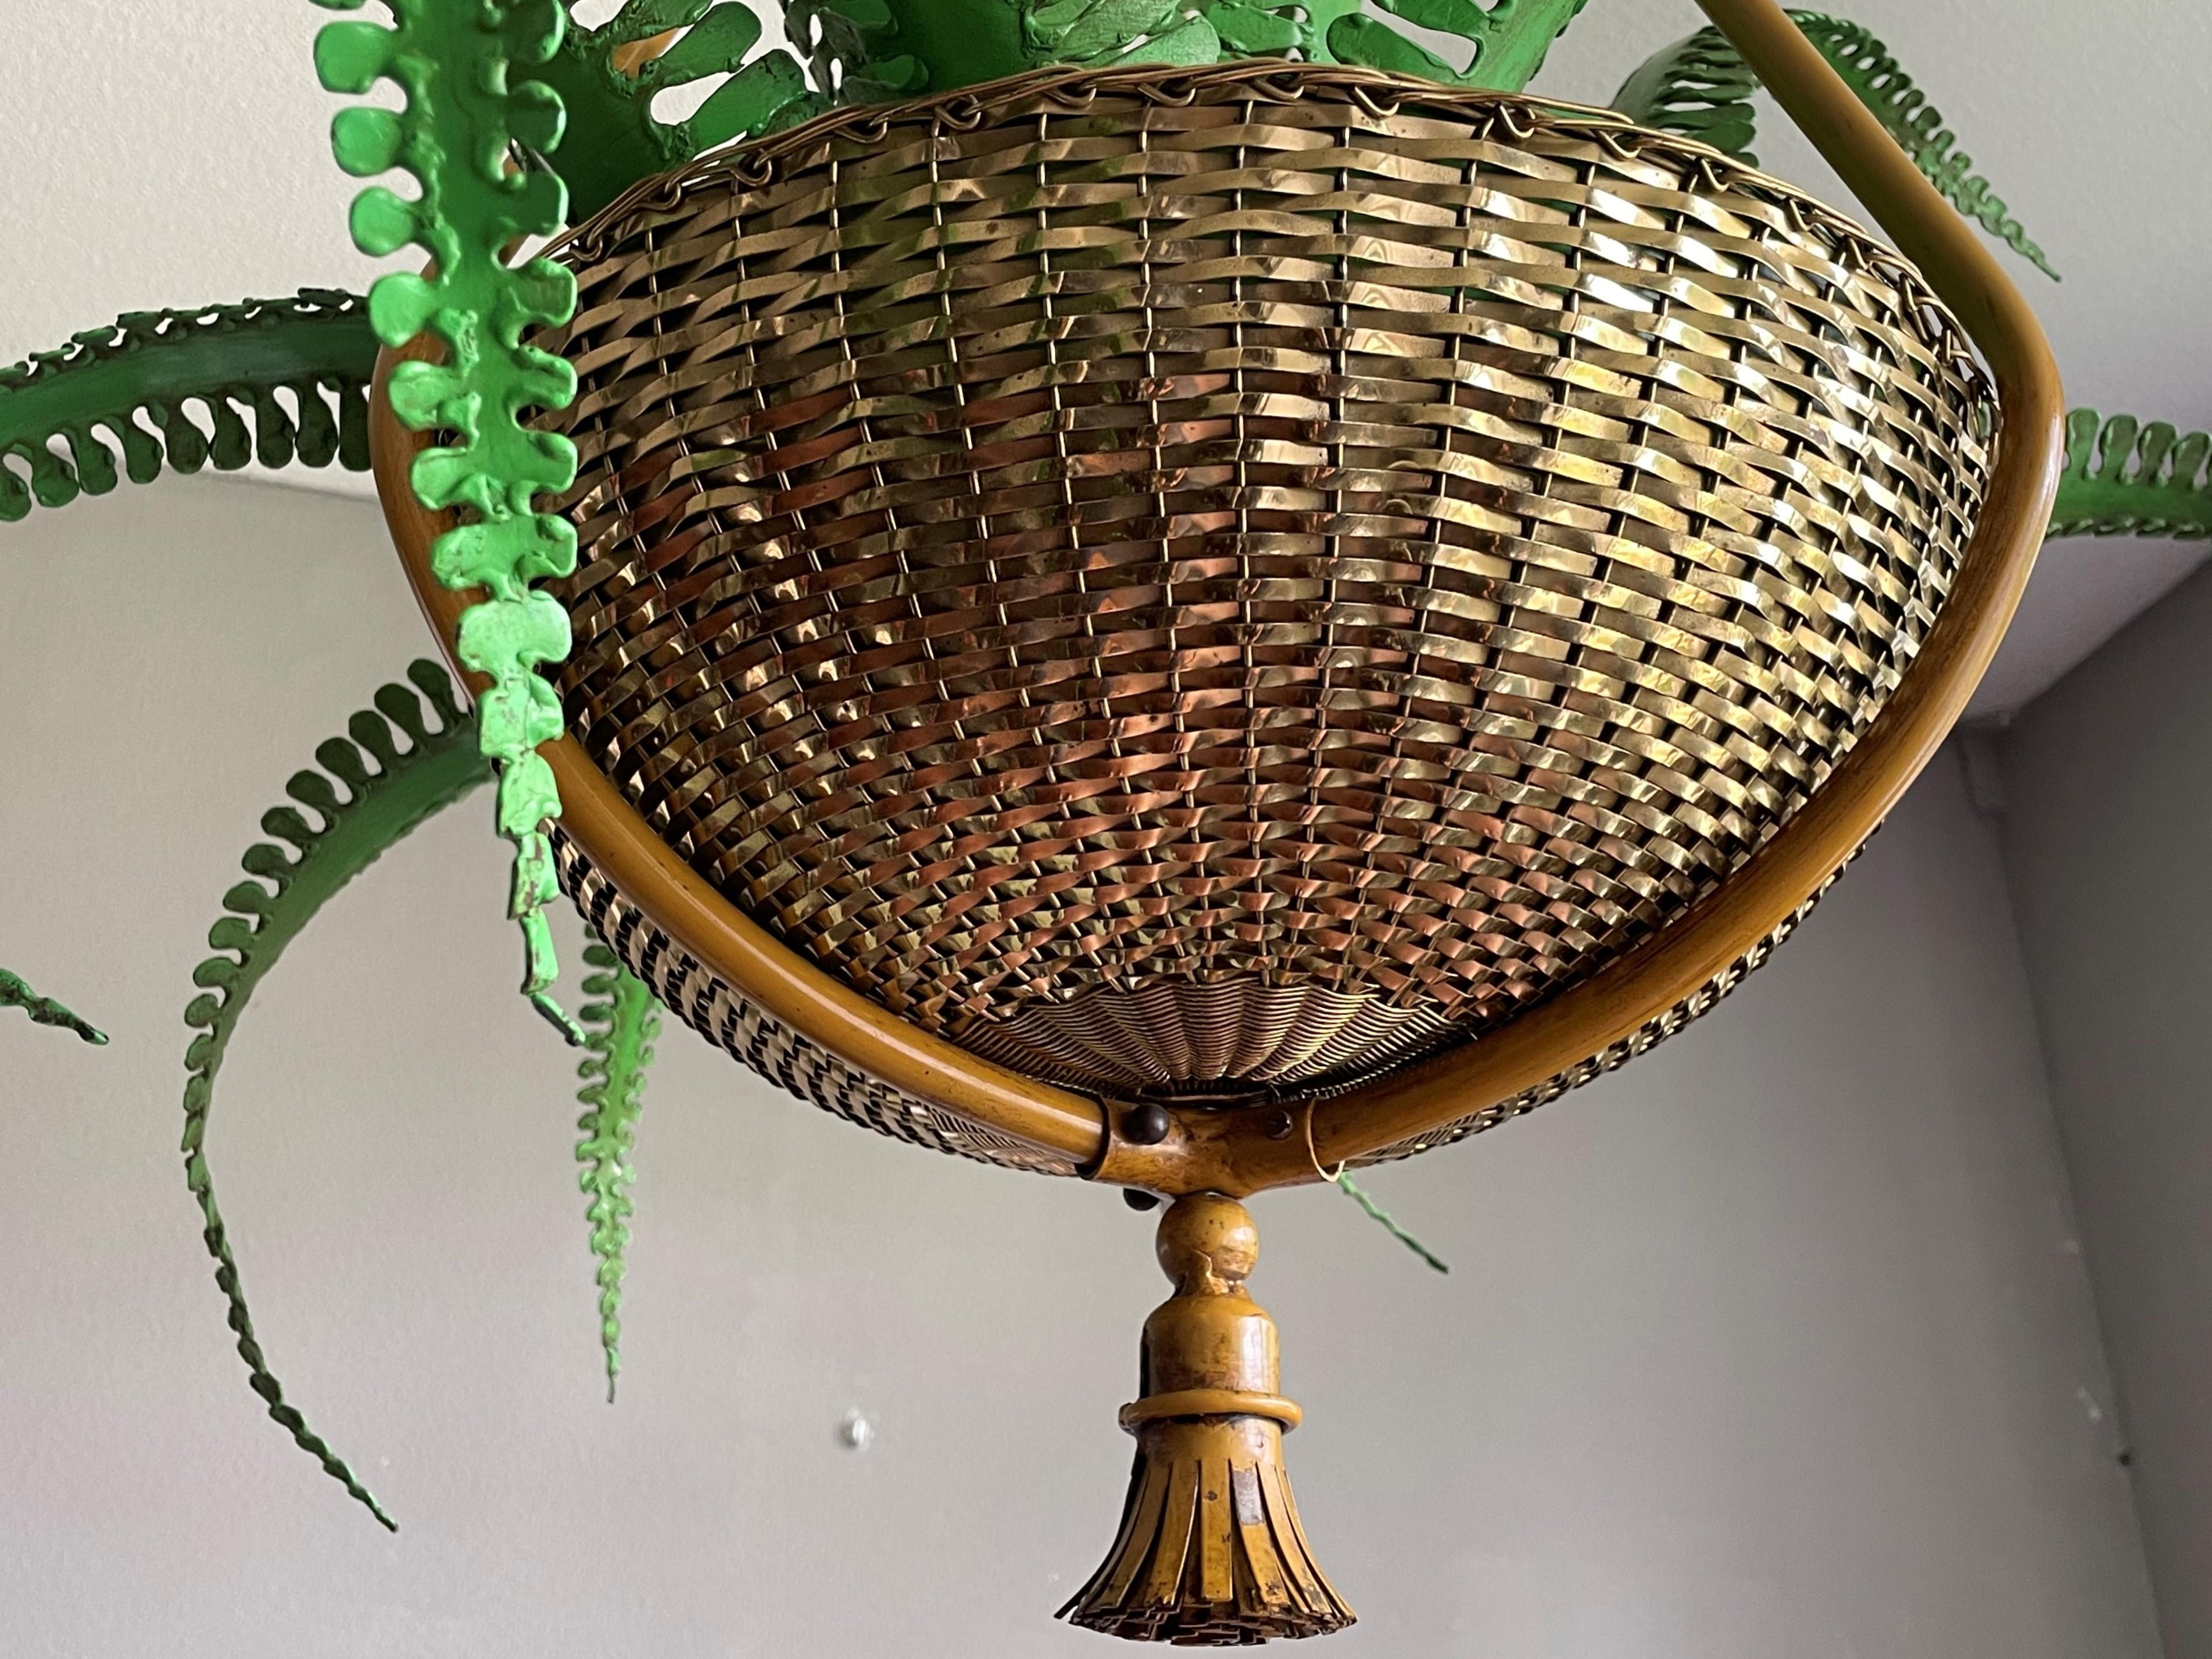 Paint Very Rare Hollywood Regency Fern Chandelier Attr. To Maison Bagues, France 1950s